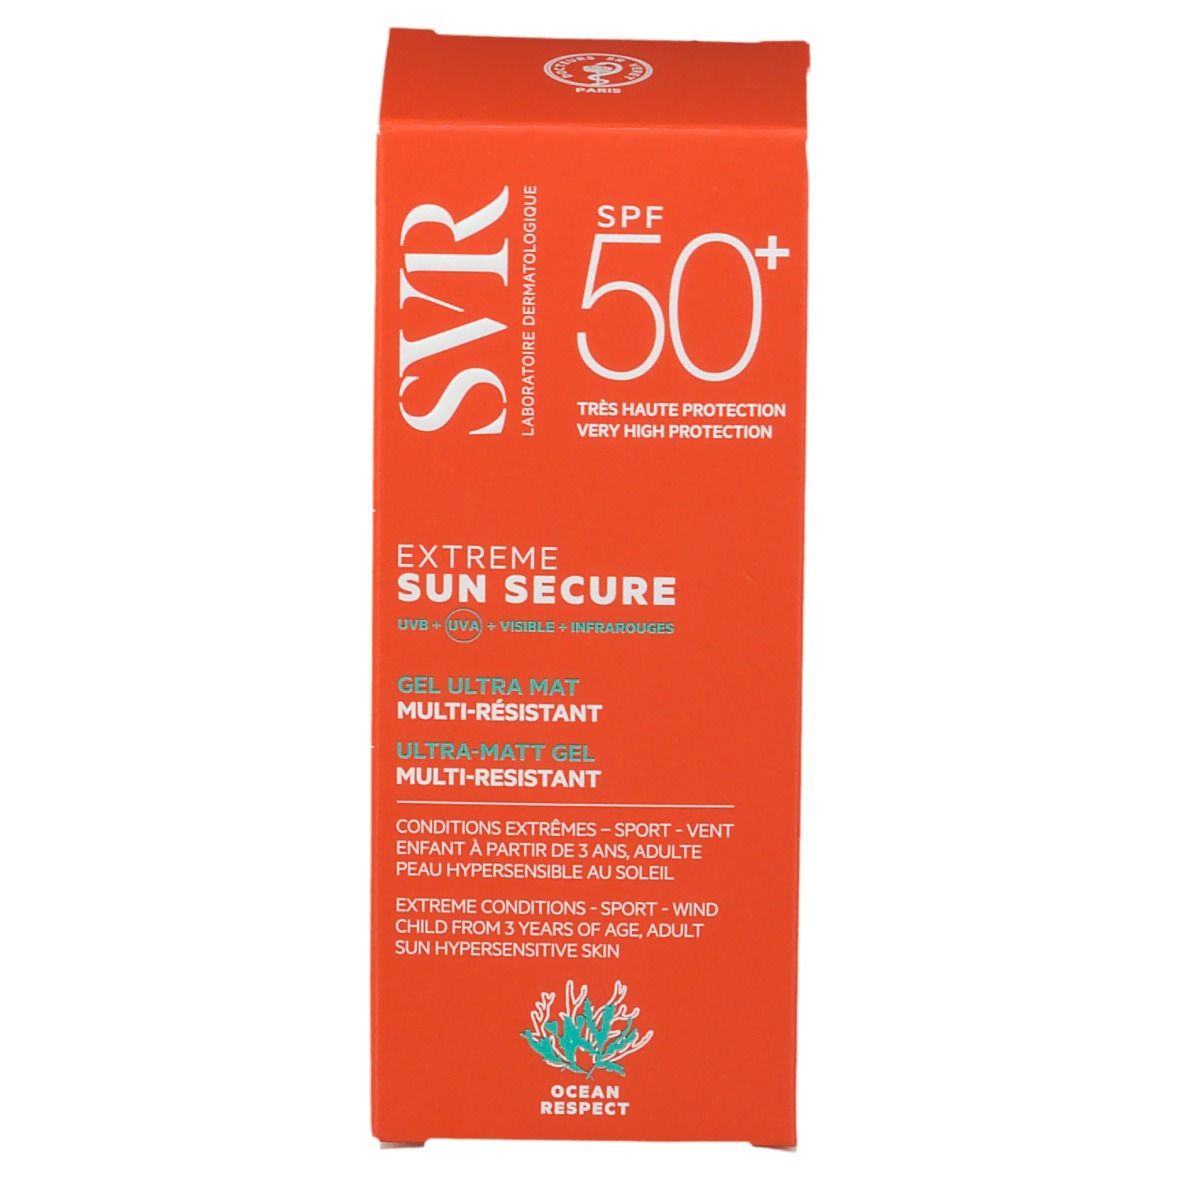 SUN SECURE Extreme SPF50+